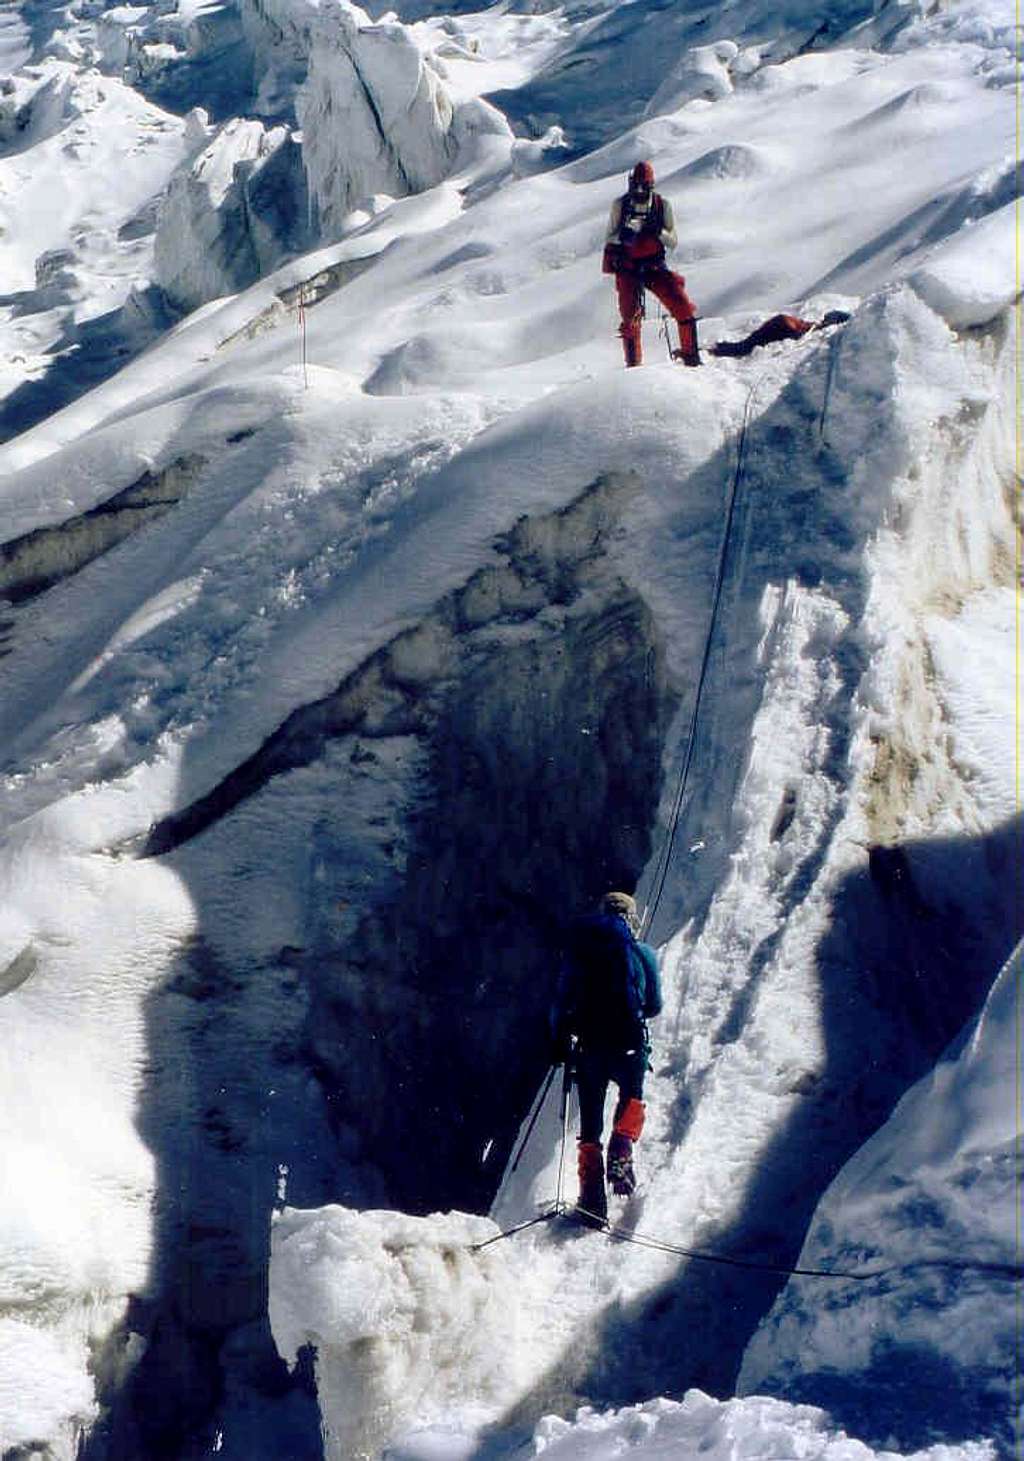 Fixing ropes in the Icefall below C1